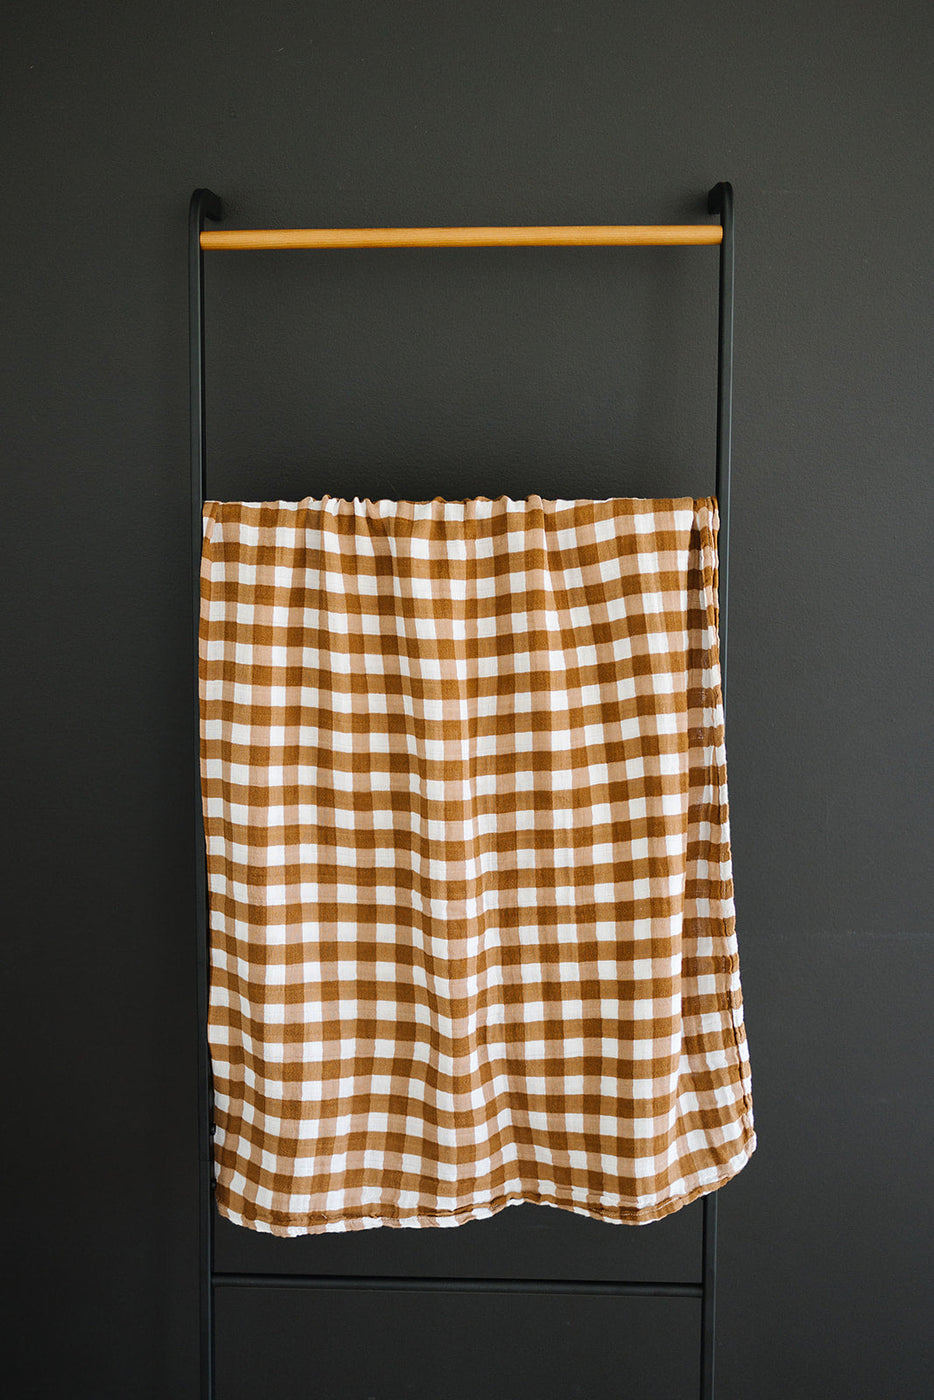 a brown and white checkered towel on a metal rod